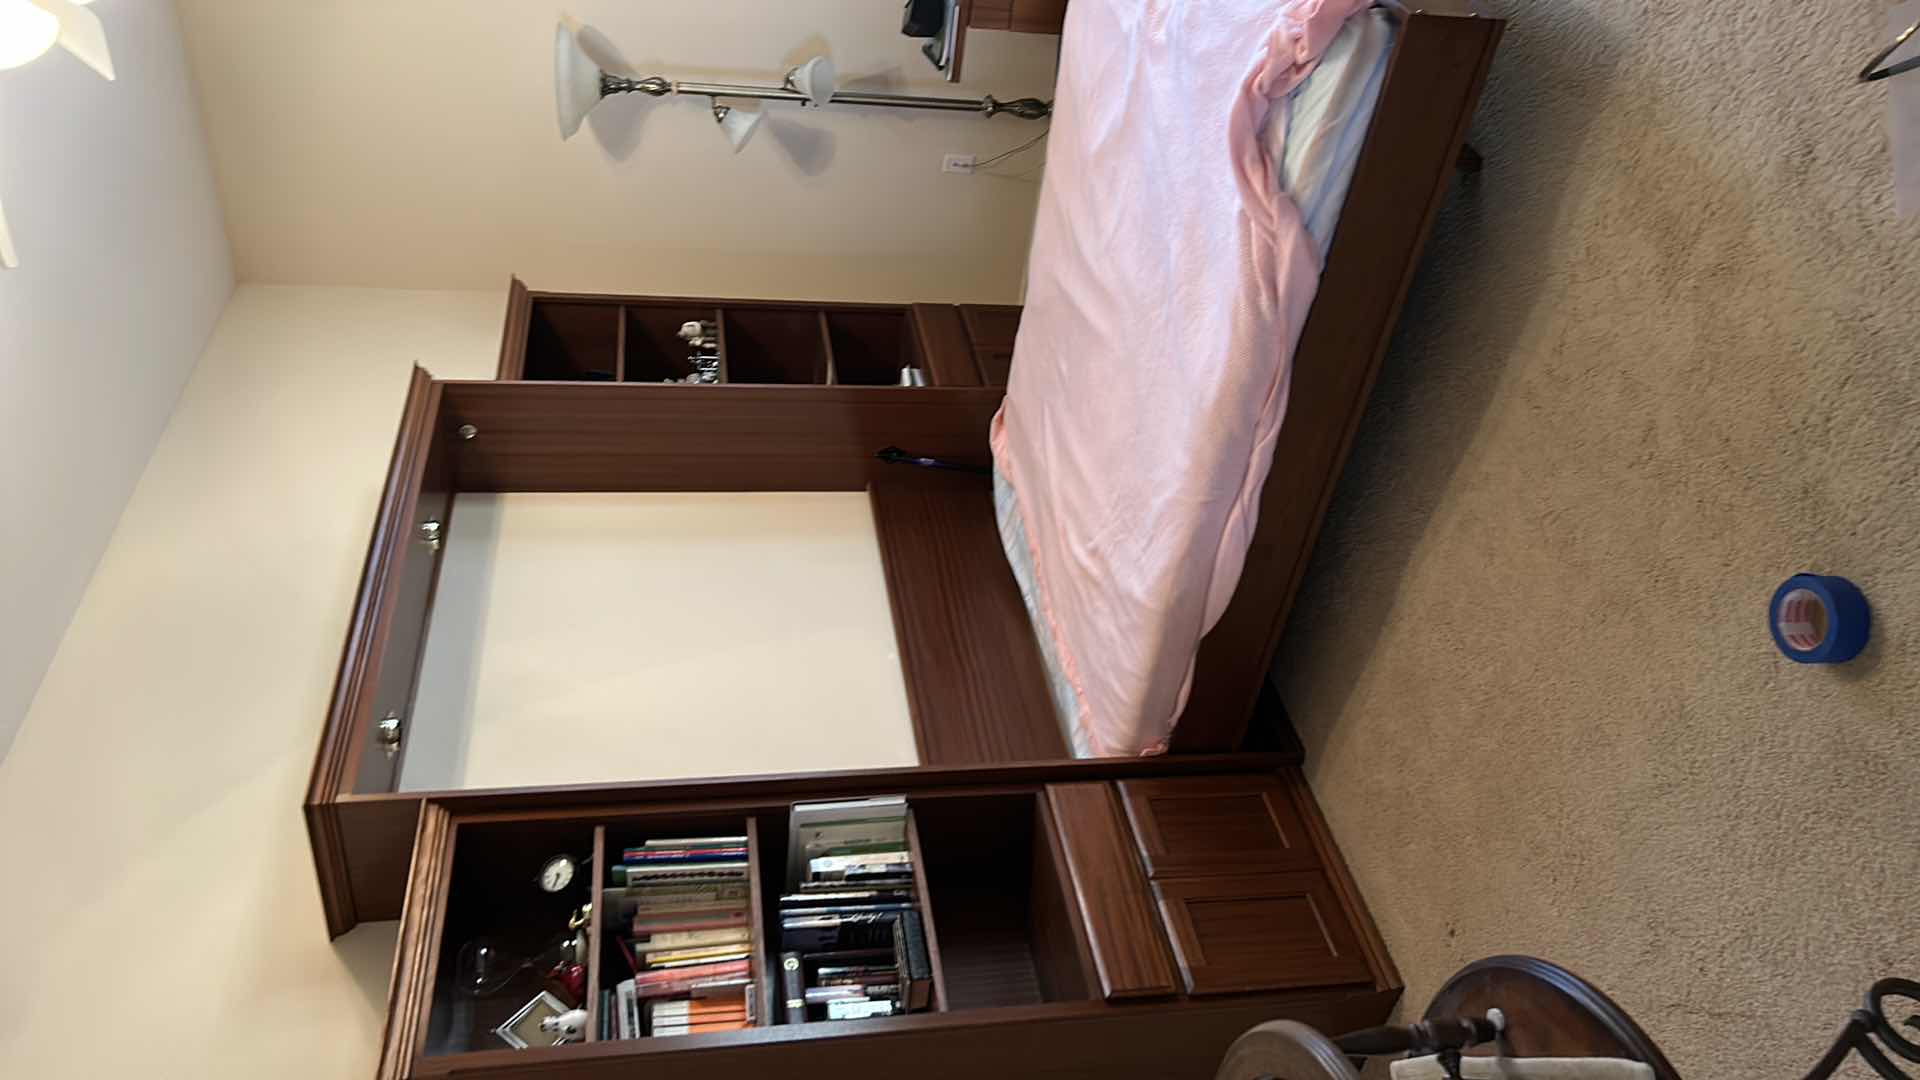 Photo 12 of WOOD MURPHY BED WITH CABINETS mattress is 62” x 81” ENTIRE UNIT 111” x 17” x 87”